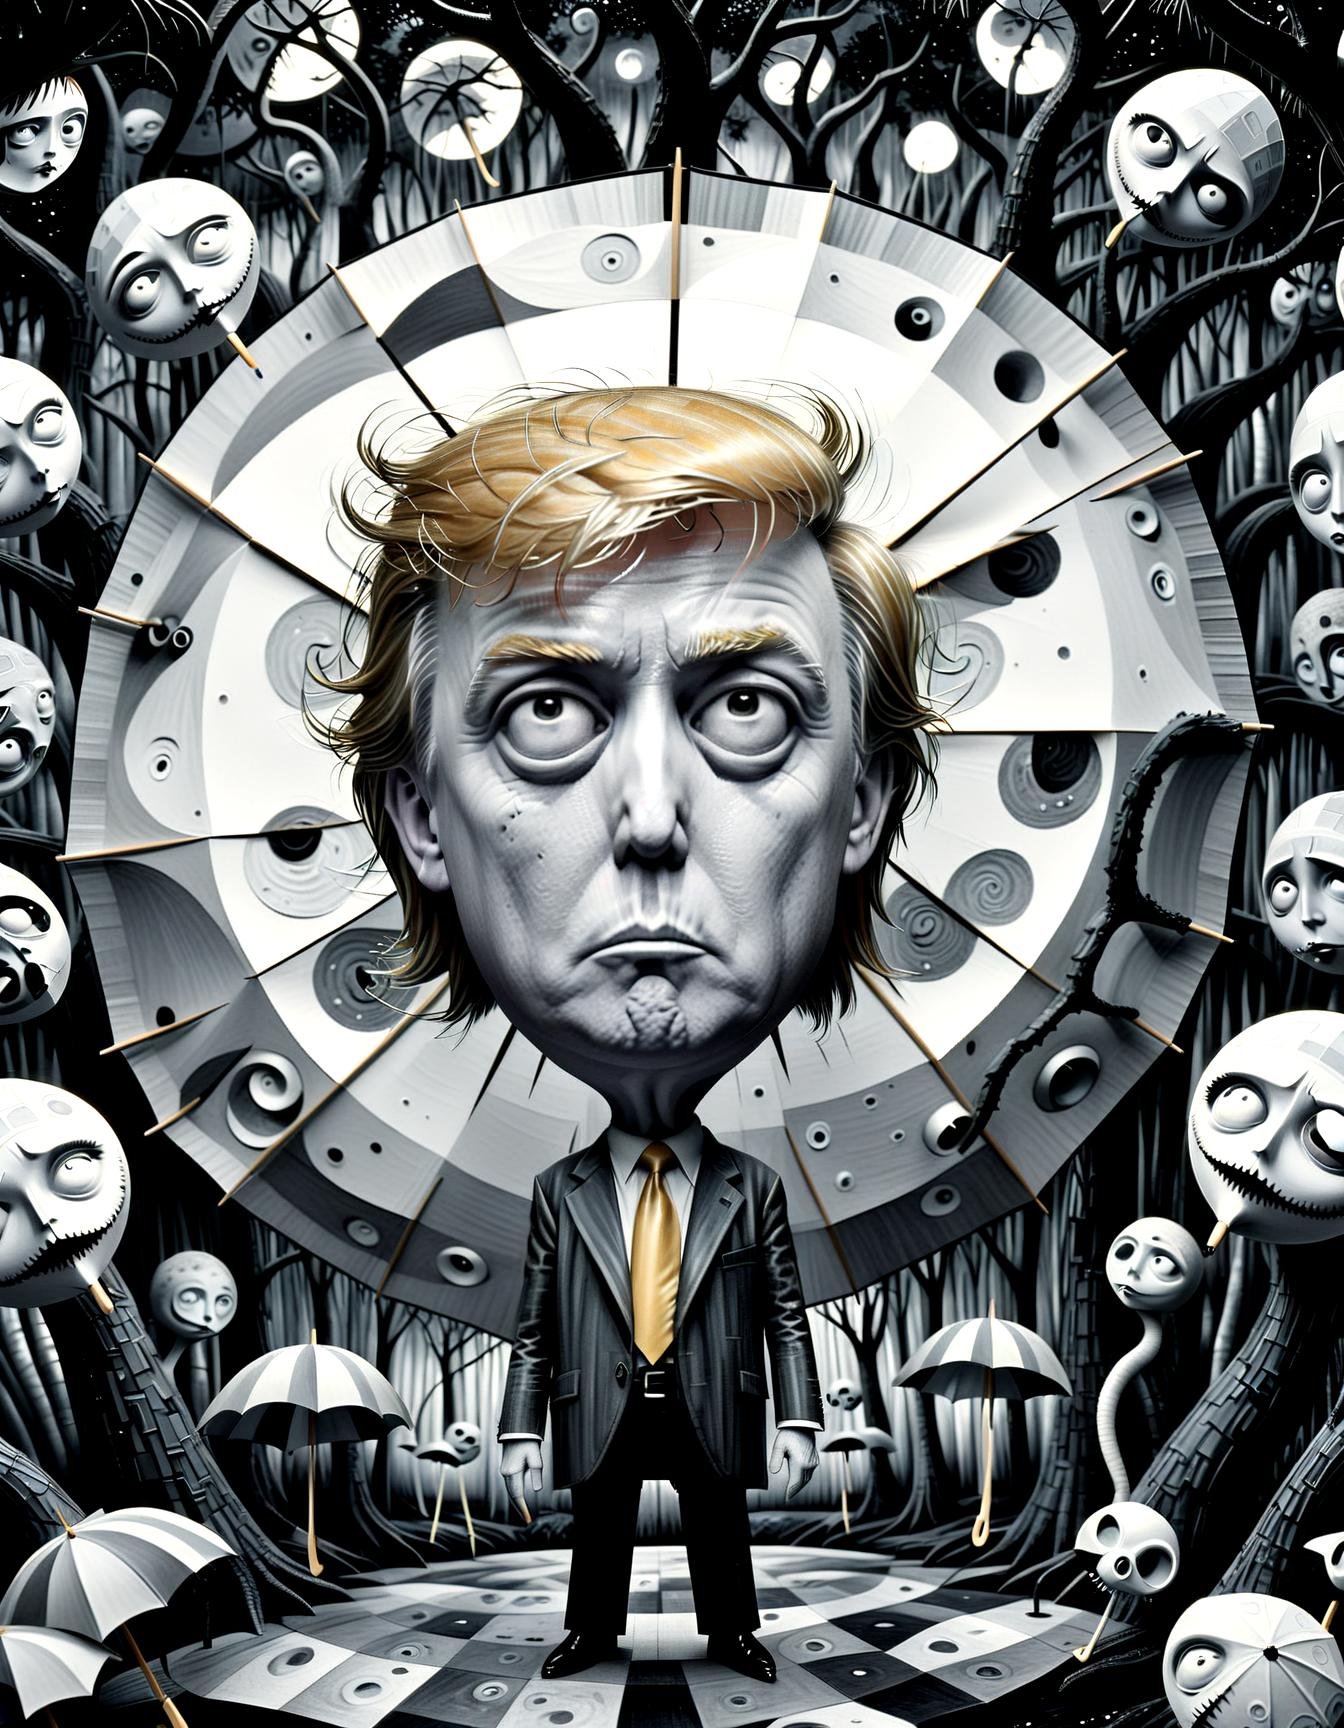 monochrome (pencil scektch:1.1),close up portrait (donald trump:1.3) Beneath the Tim Burton moon, a forest of umbrella-shaped trees emerges. a kaleidoscope of geometry patterns, adds to the surreal nature of the scene, dance of madness and geometry.,(hand drawn with pencil:1.15), (tim burton style:1.27), ,